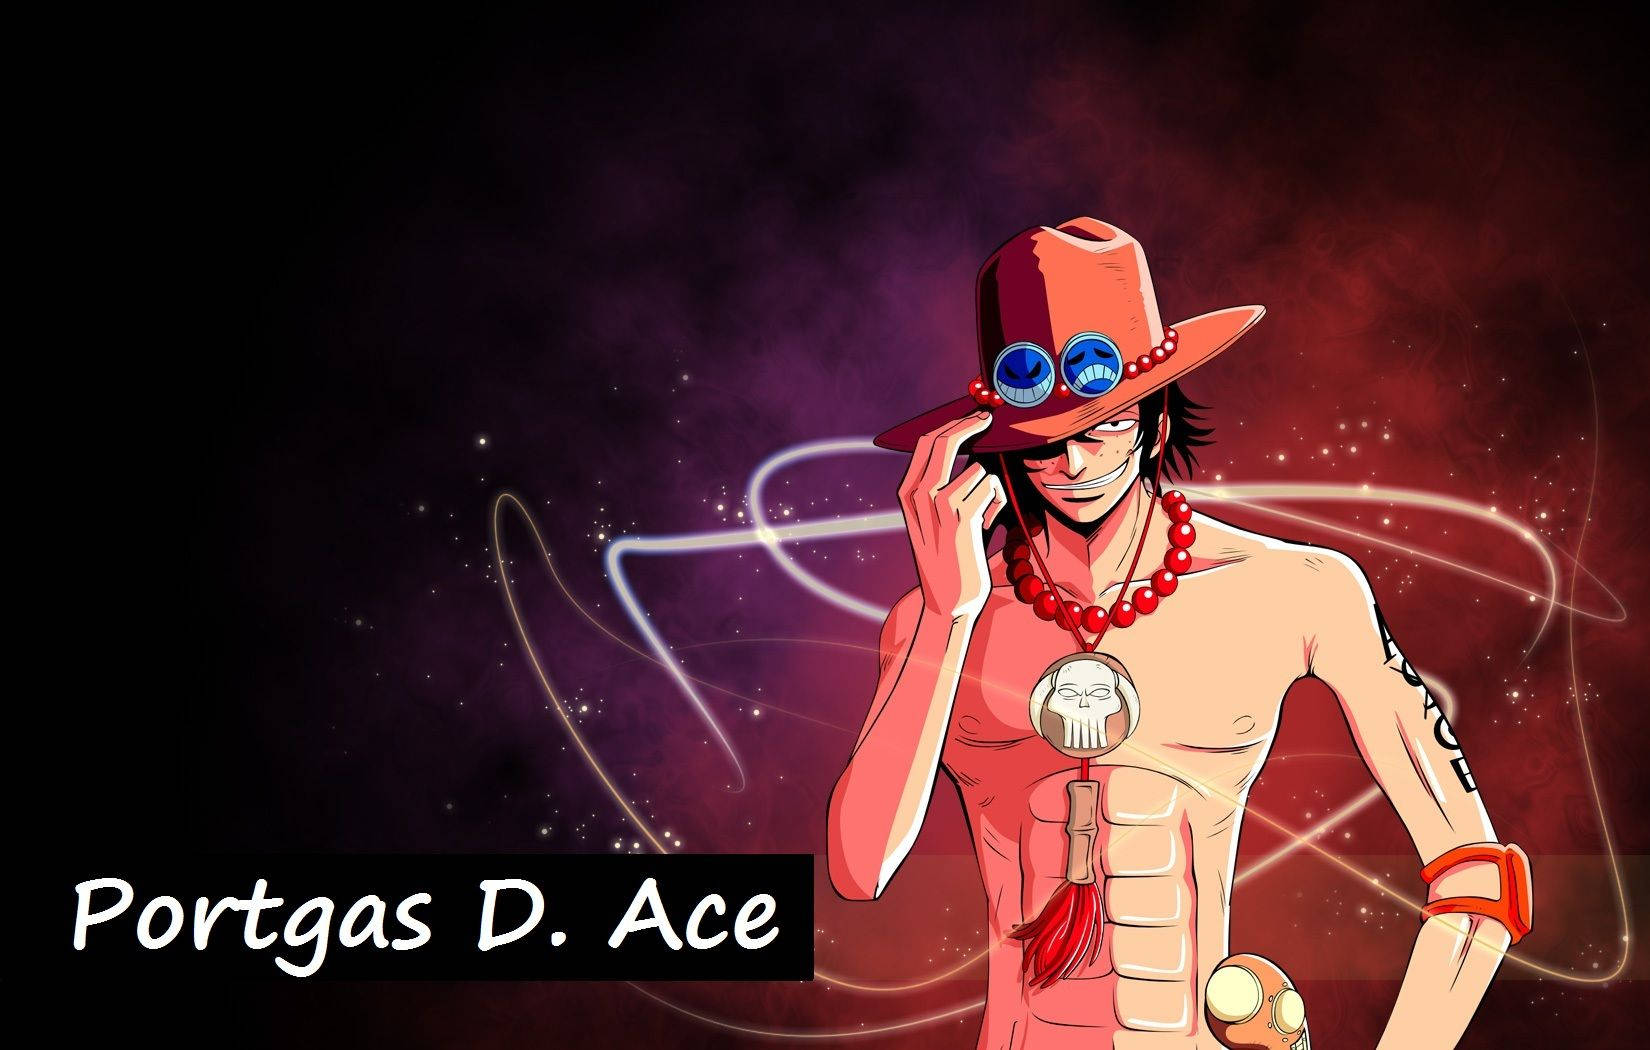 Download One Piece Ace Anime Poster Wallpaper 